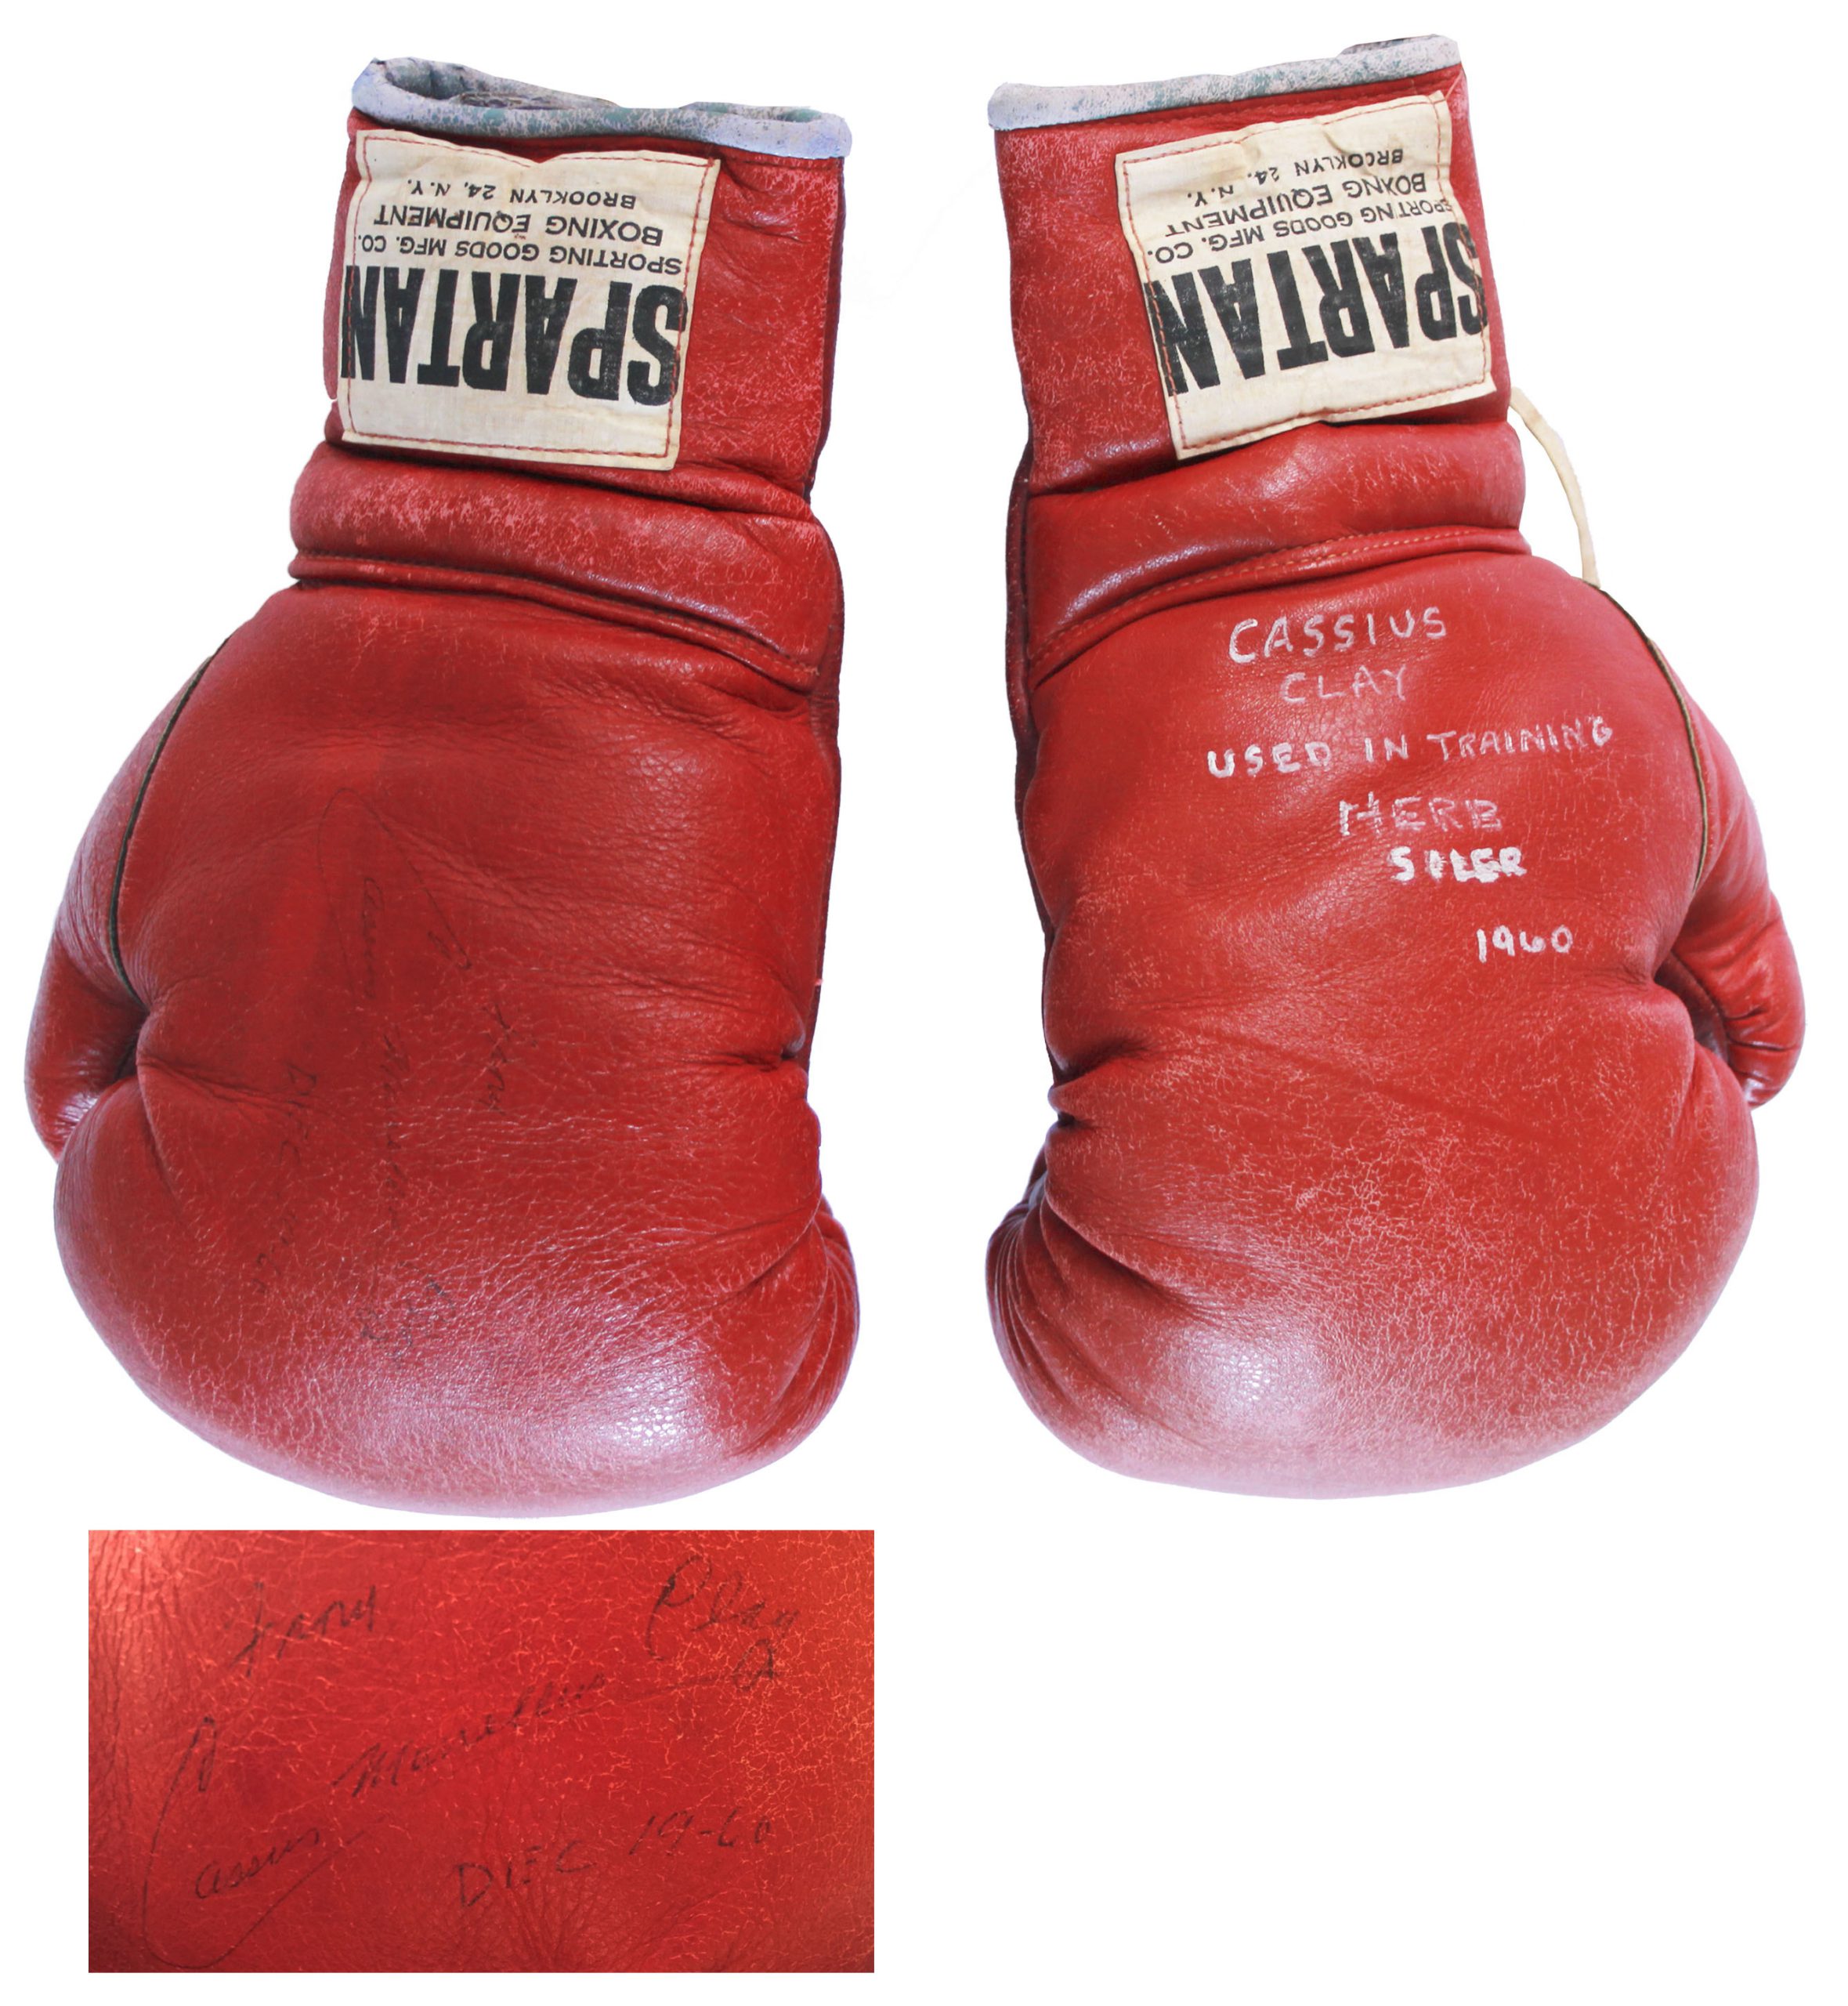 Sell Your Original Joe Louis Fight Worn Trunks at Nate D. Sanders Auctions